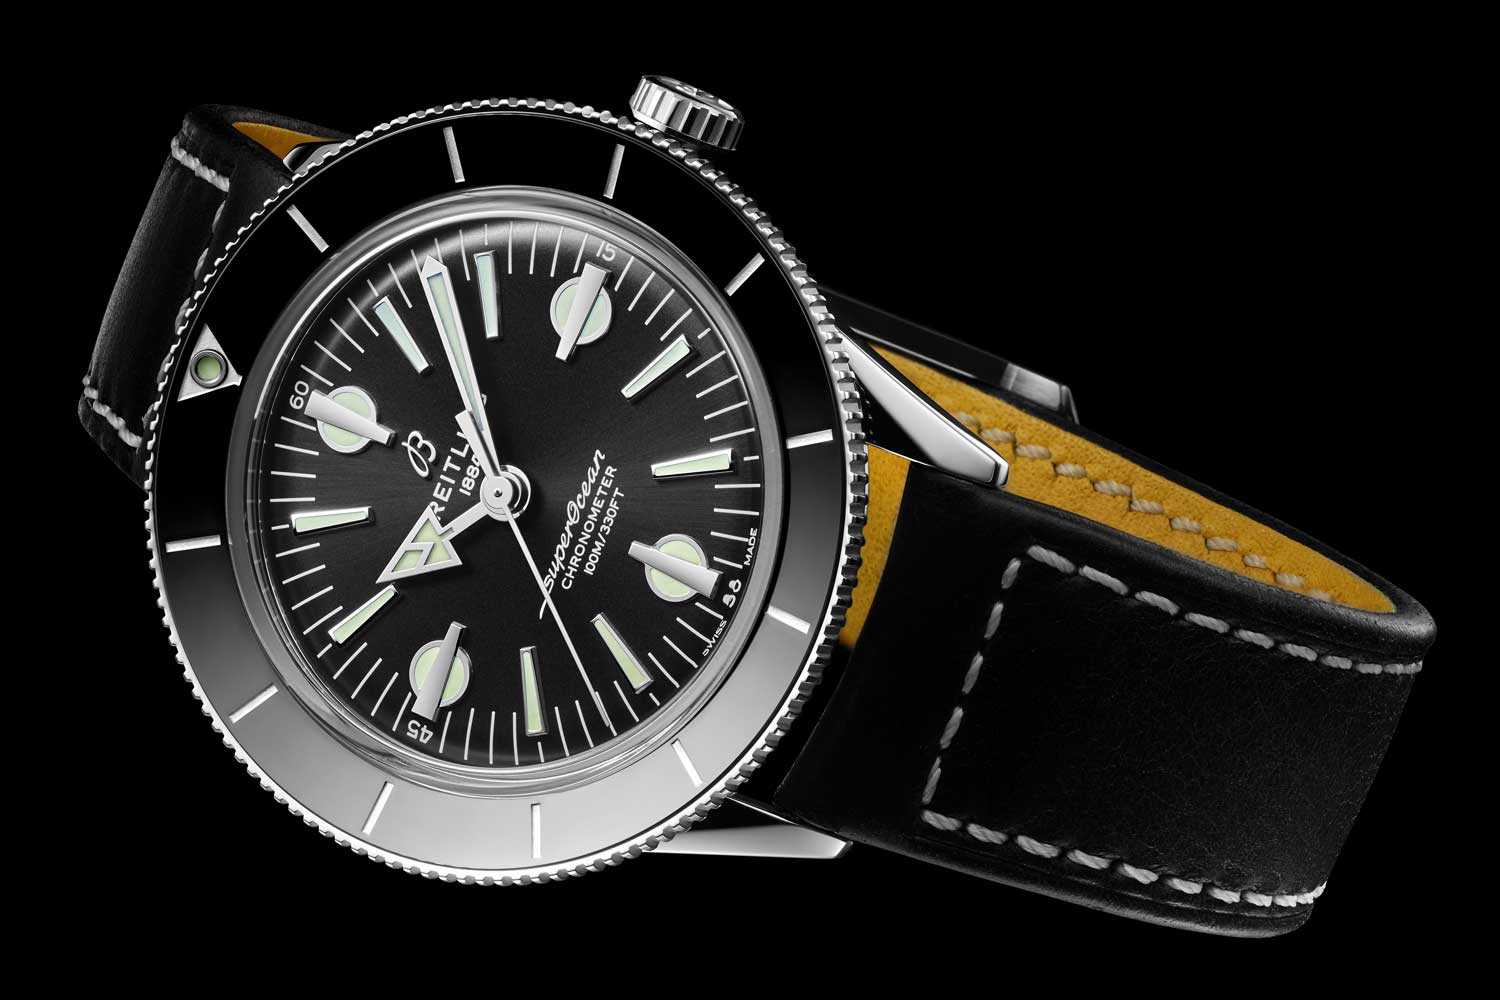 Superocean Heritage '57 with a black dial and a black vintage-inspired leather strap